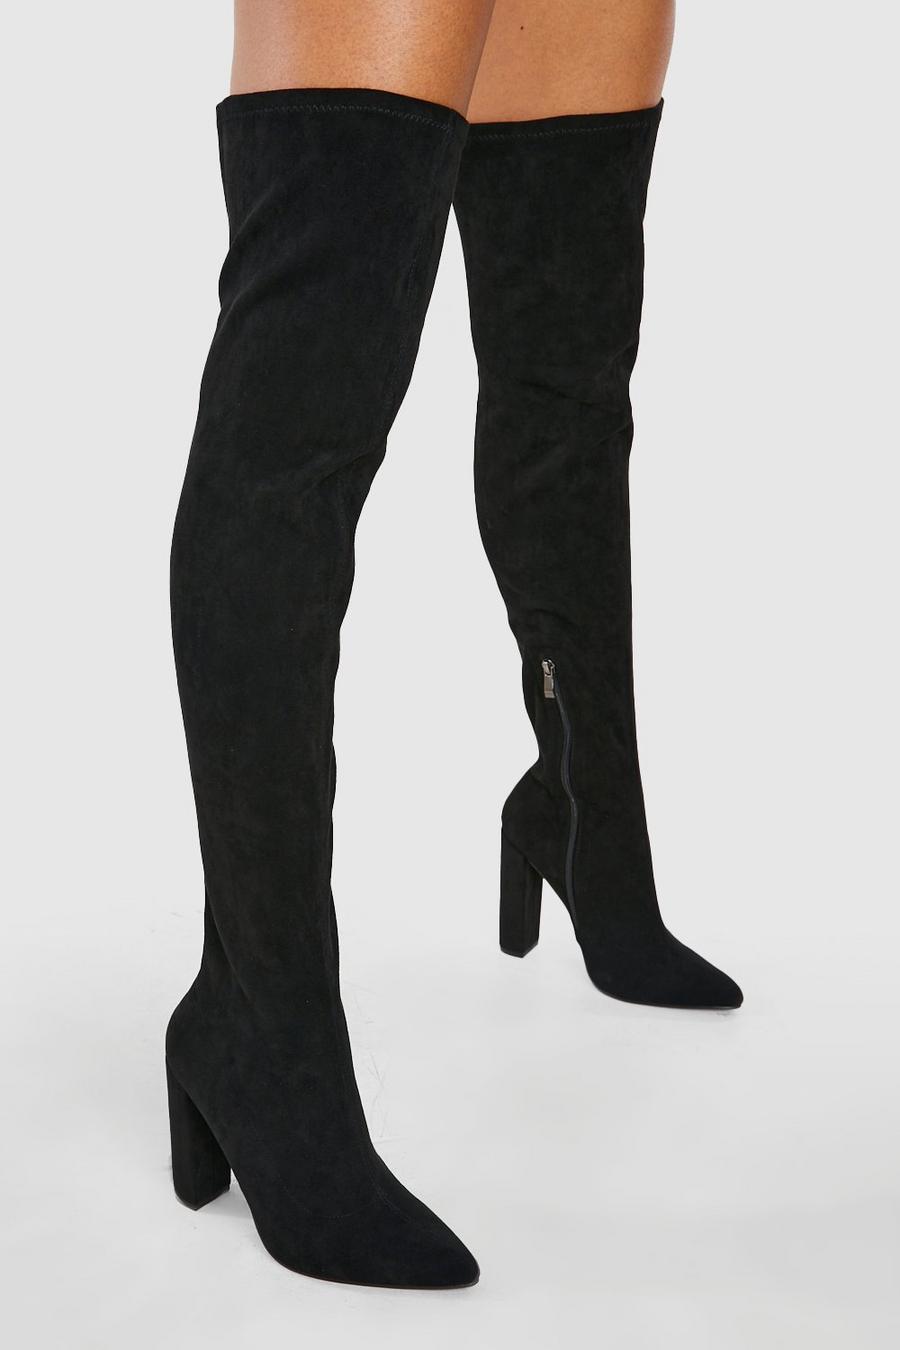 Black noir High Block Heel Pointed Toe Over The Knee Boots